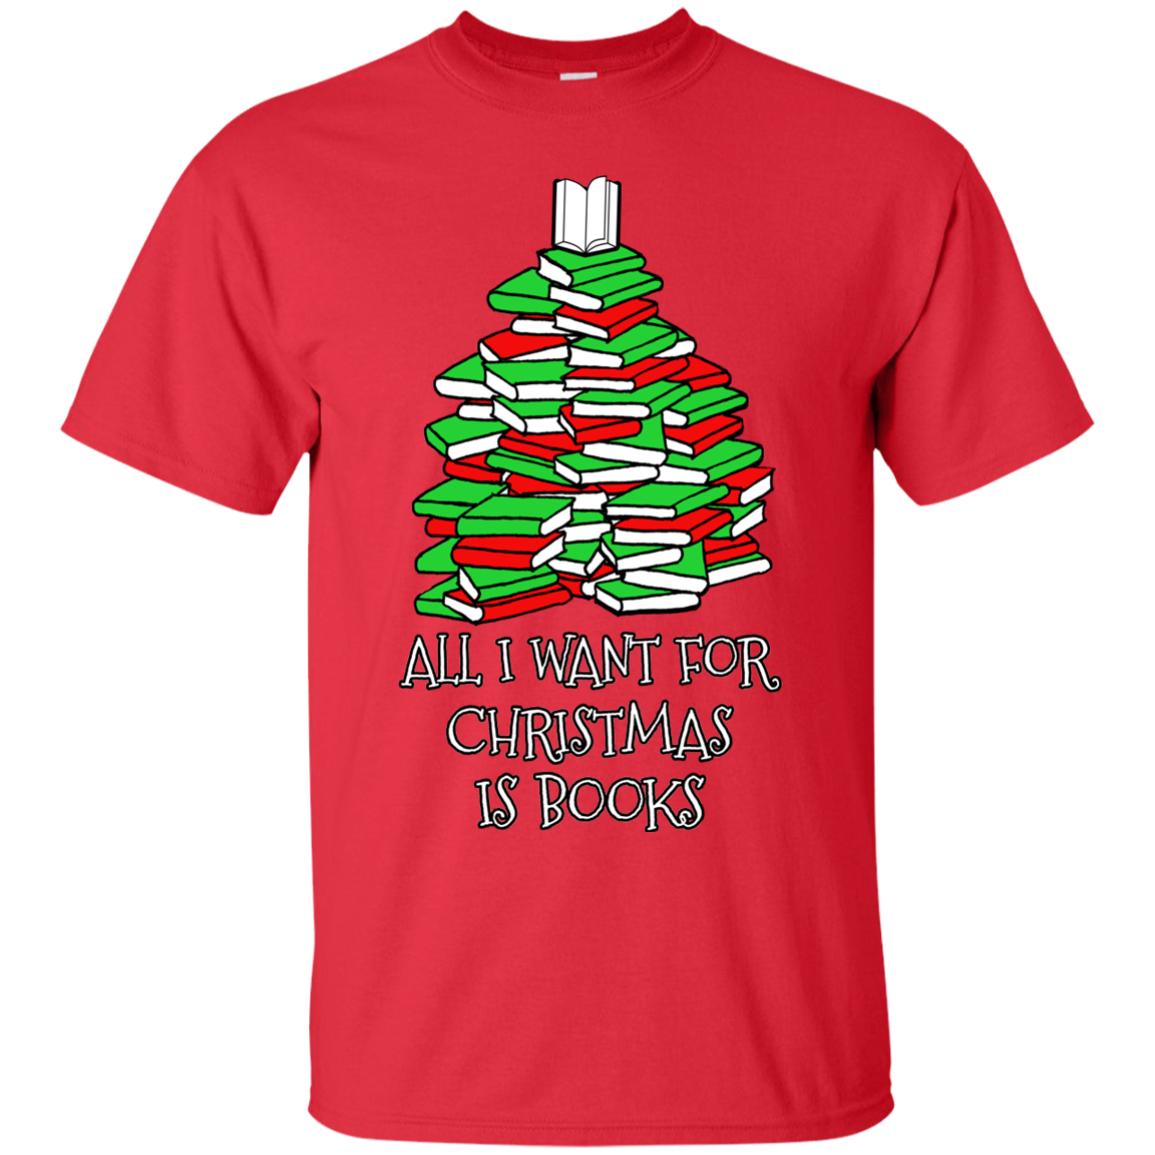 All I Want for Christmas is Books Ultra Cotton T-Shirt